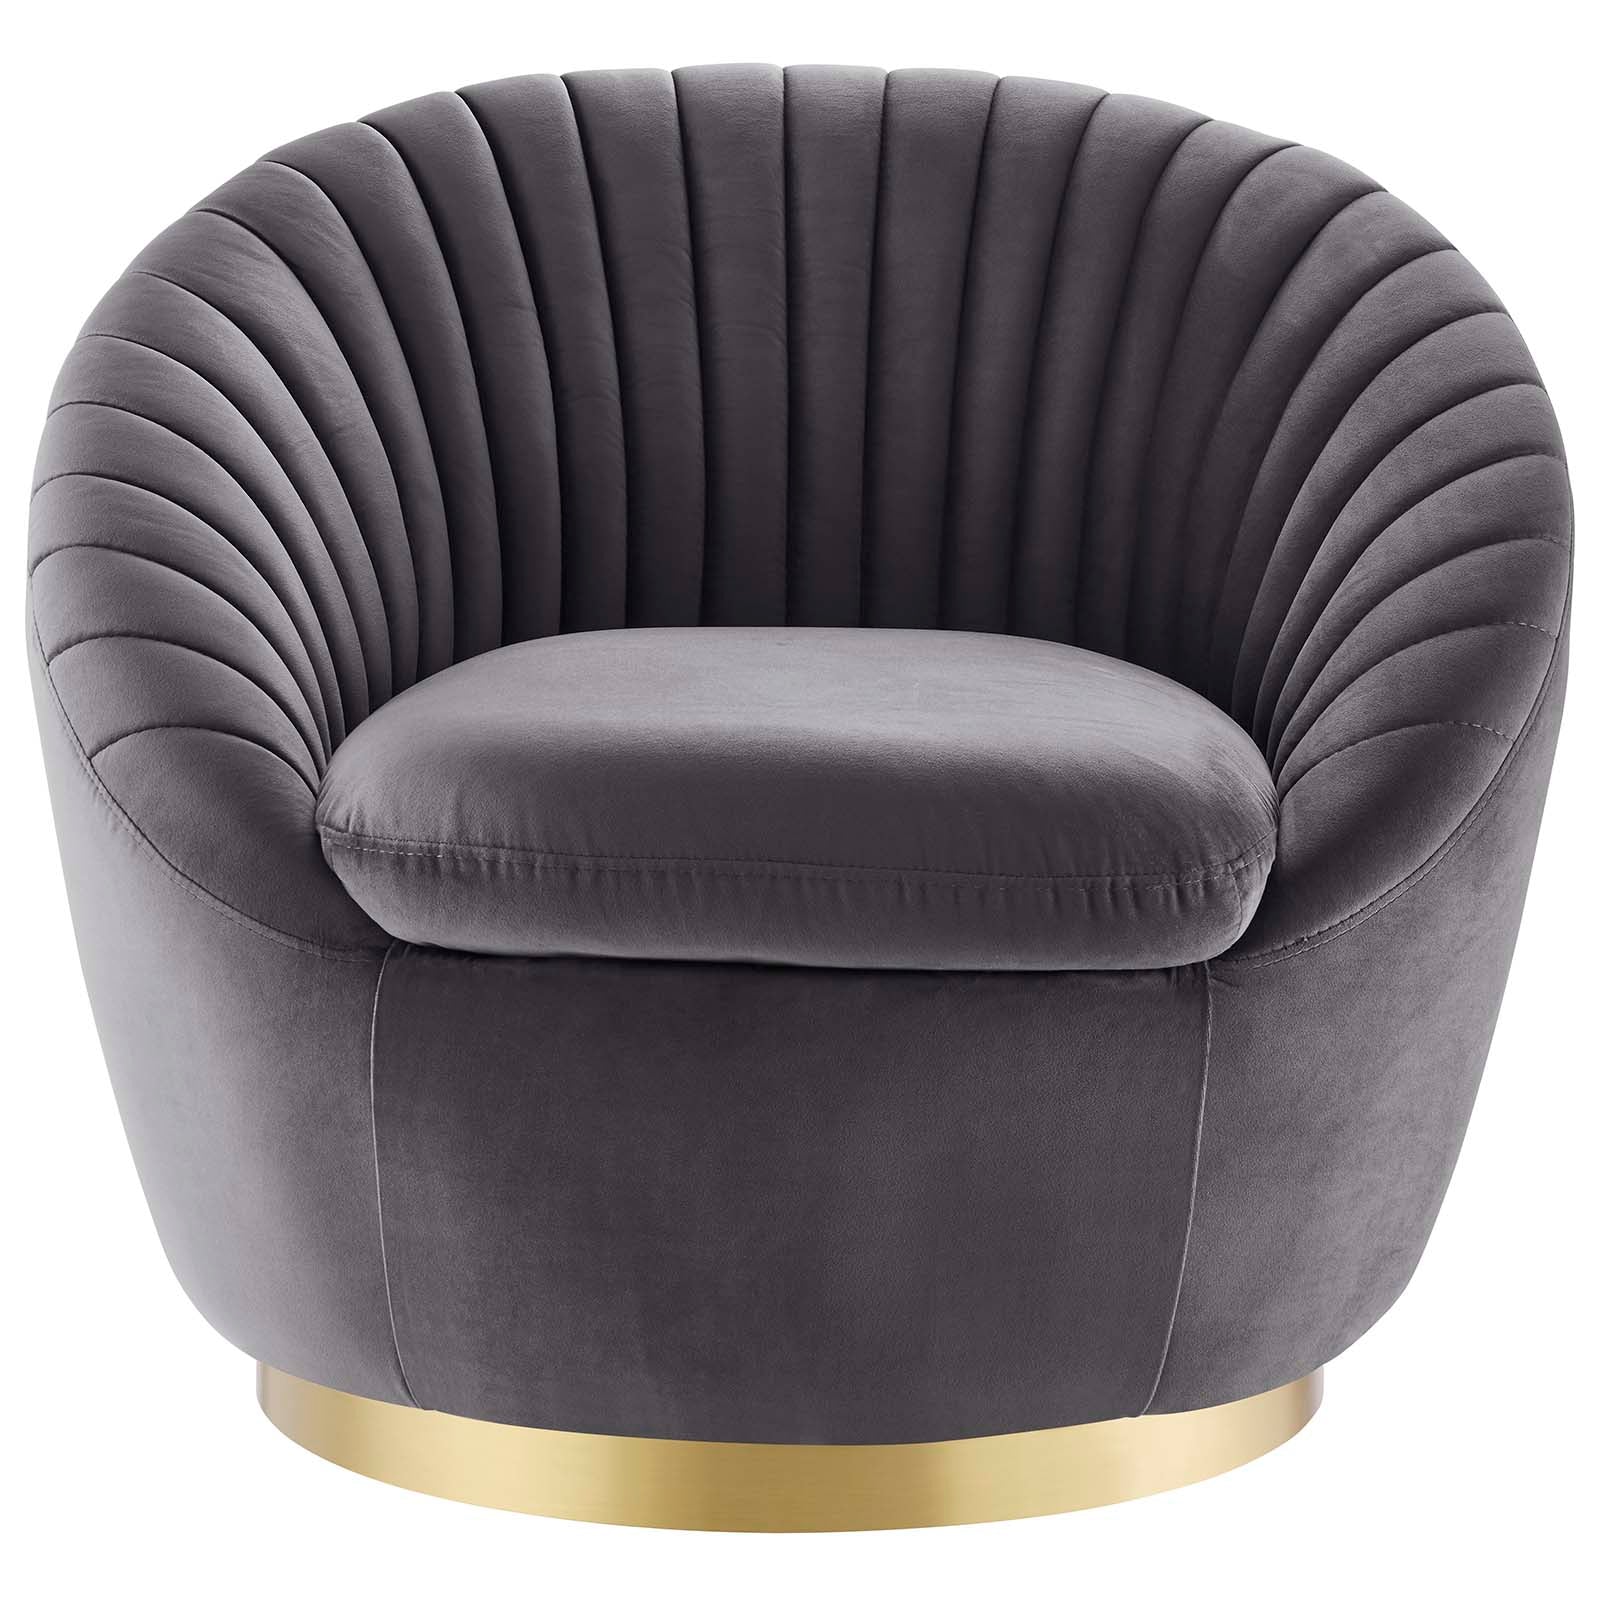 Whirr Tufted Performance Velvet Swivel Chair-Chair-Modway-Wall2Wall Furnishings